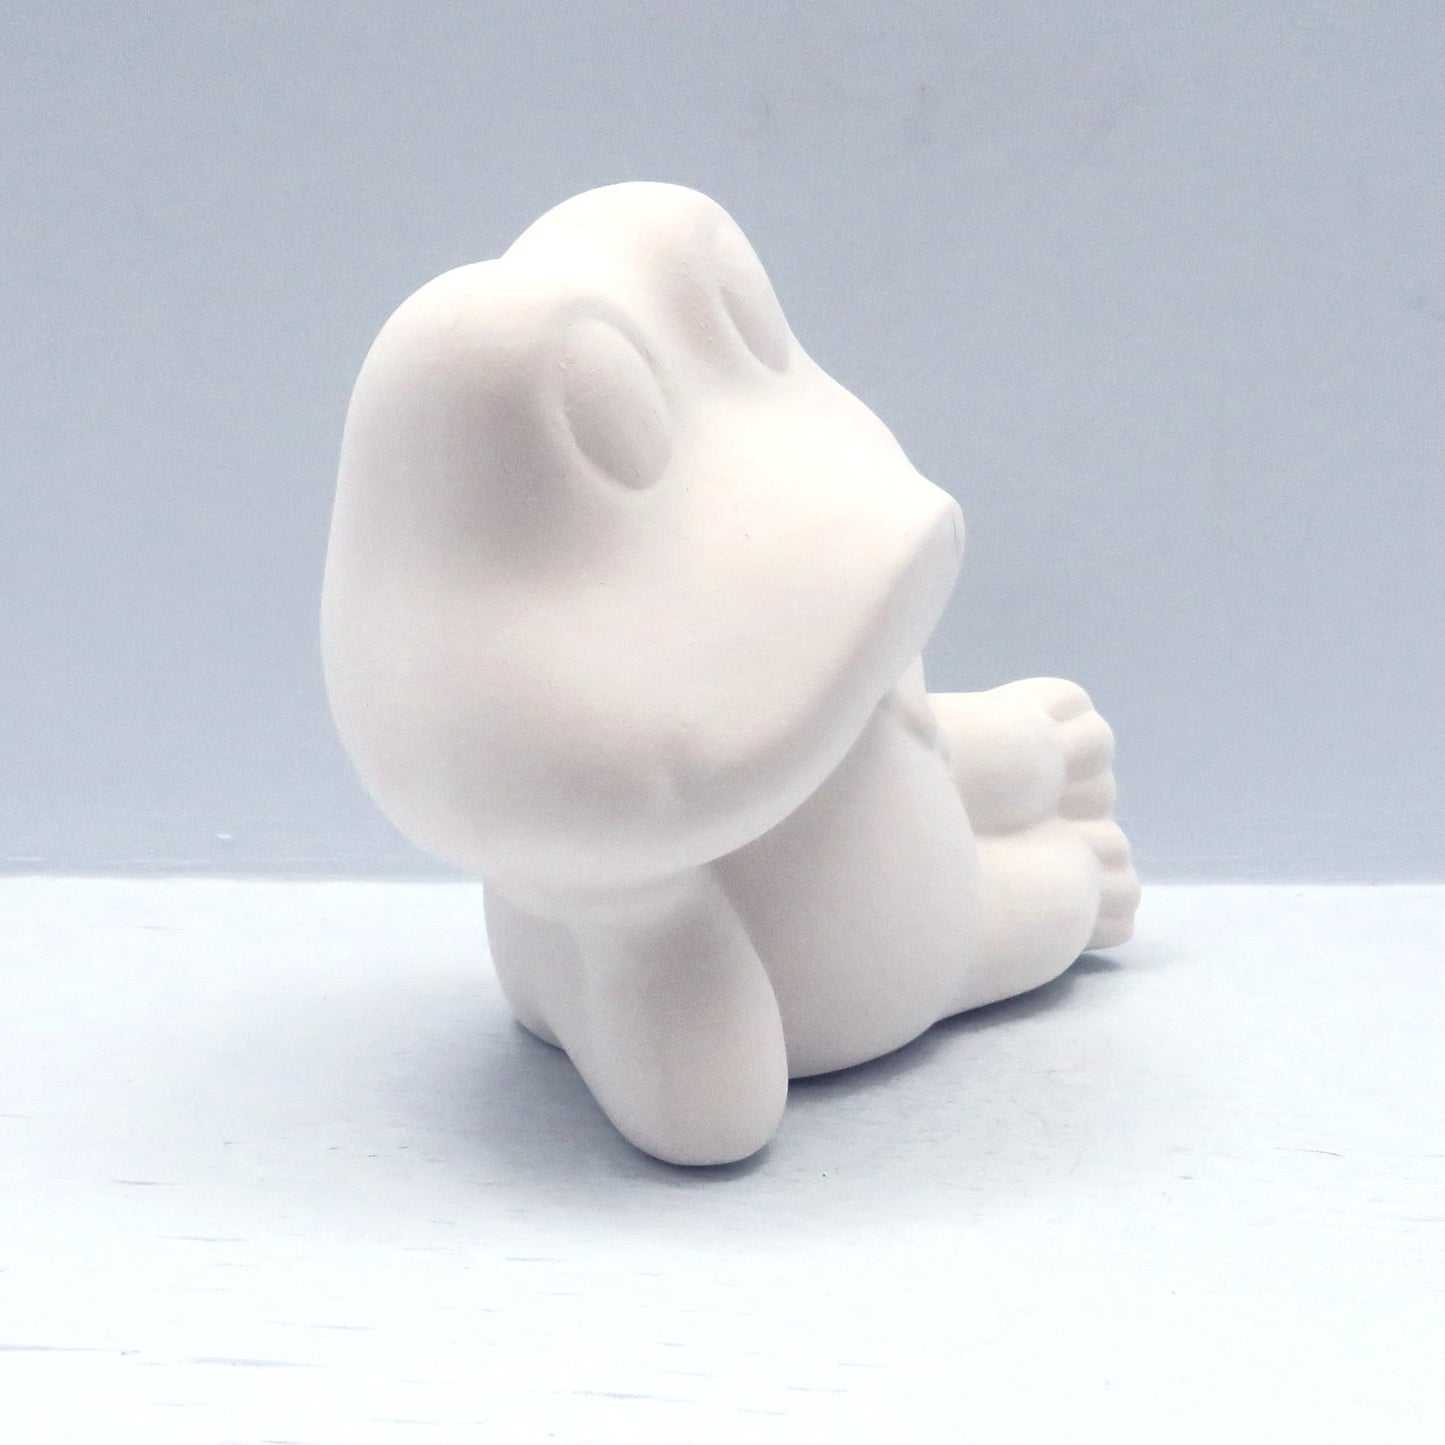 Ceramic frog figurine to paint lying on his side at an angle, so that his head is closest to the camera.